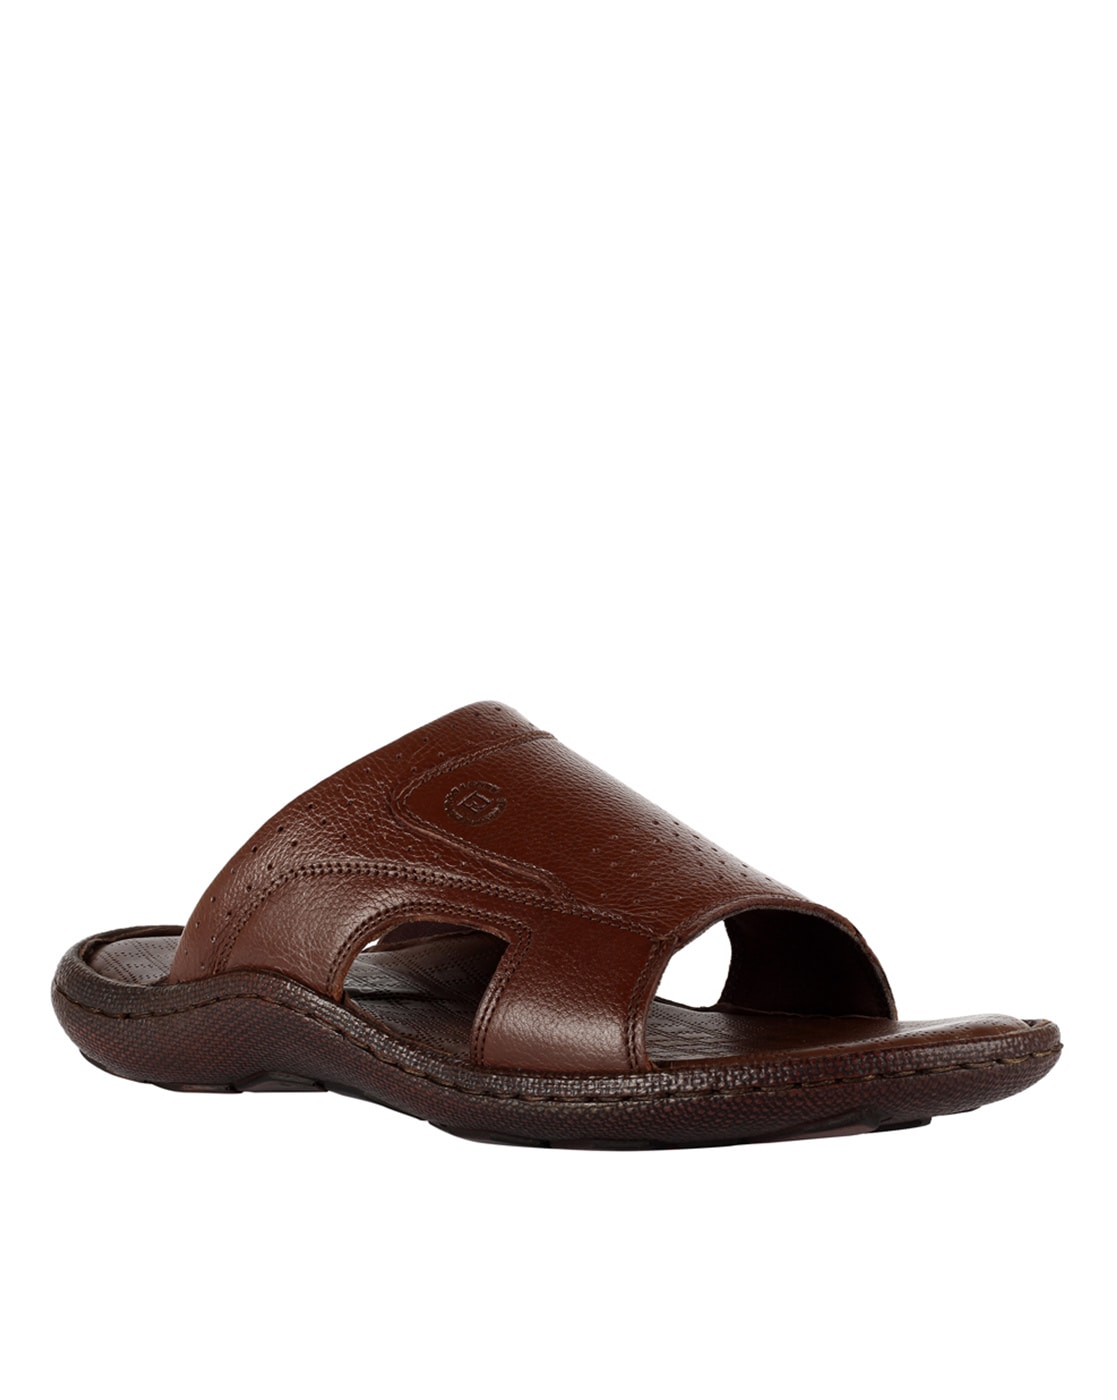 franco leone leather slippers